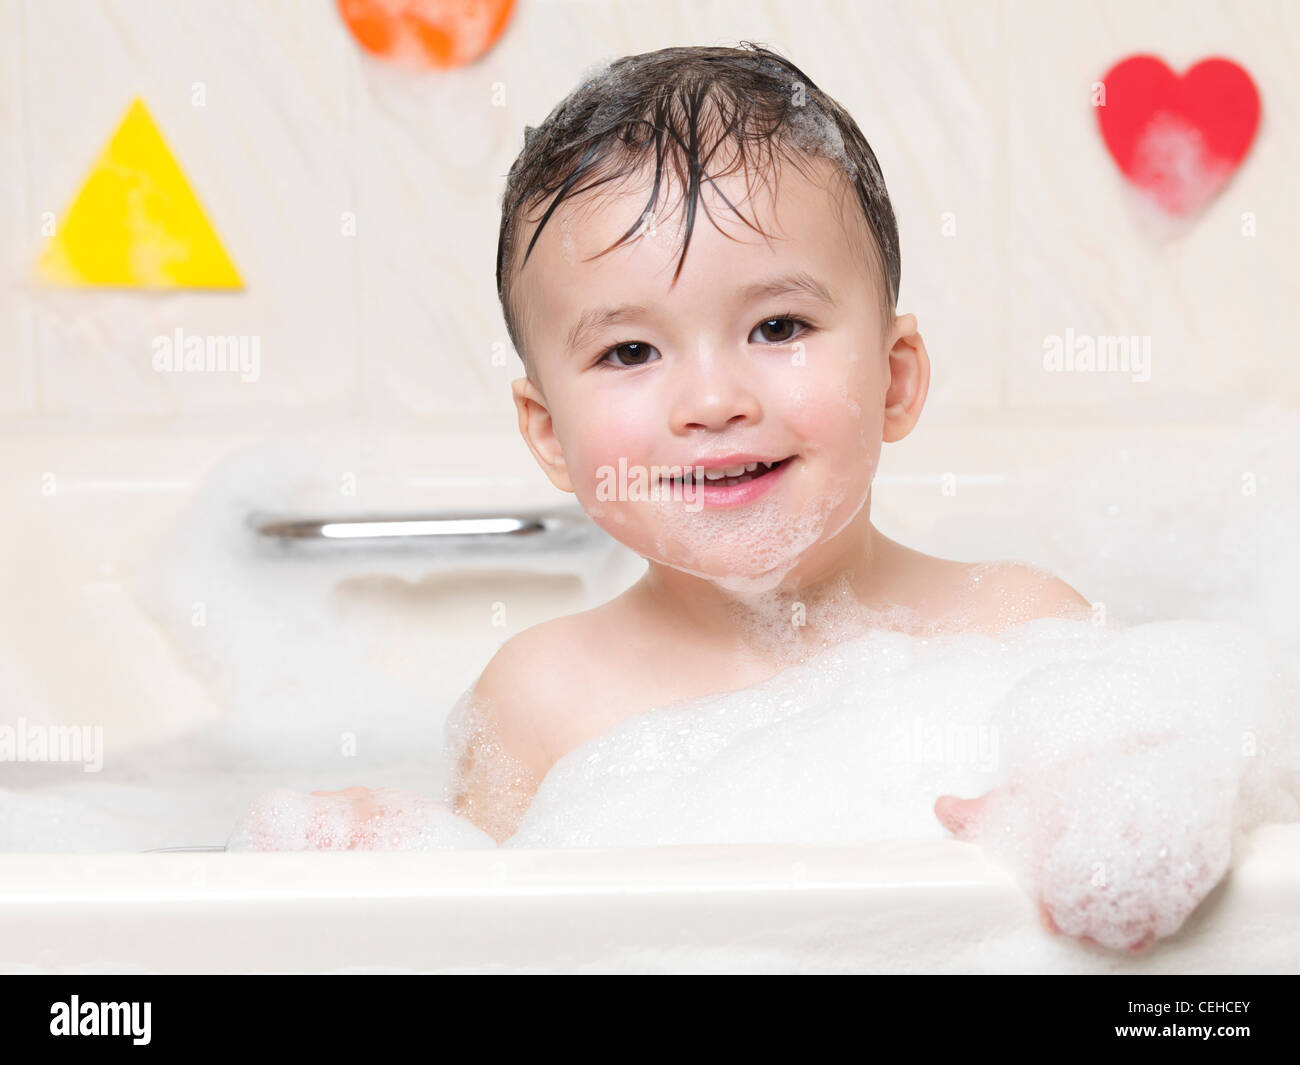 Cute Smiling Two Year Old Child Enjoying A Bubble Bath Stock